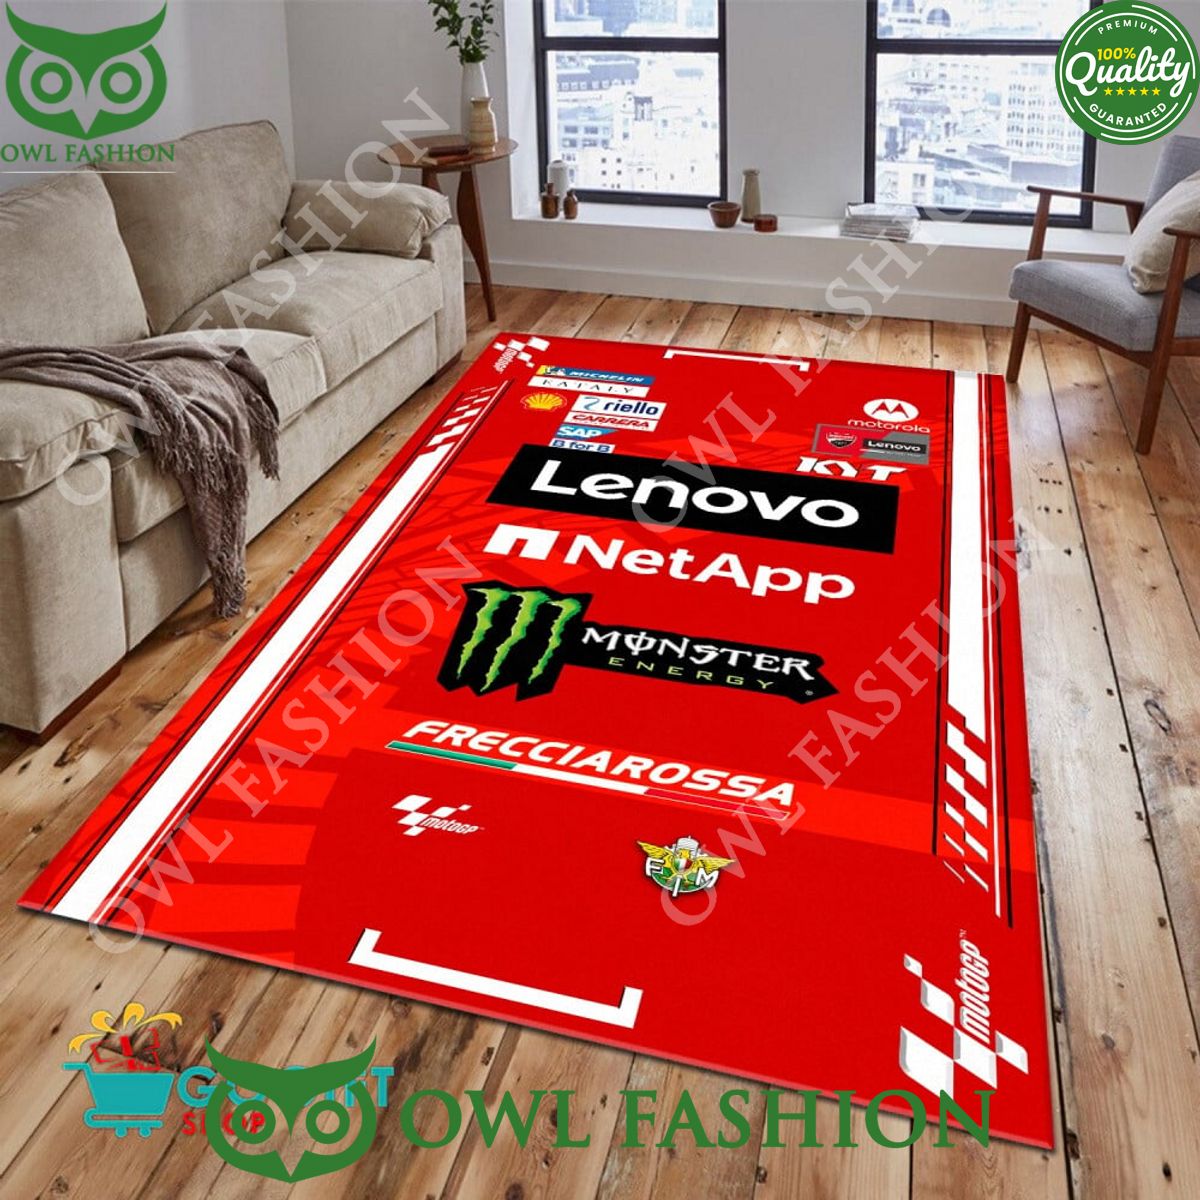 Ducati Lenovo Racing Team Monster Carpet Rug Such a charming picture.